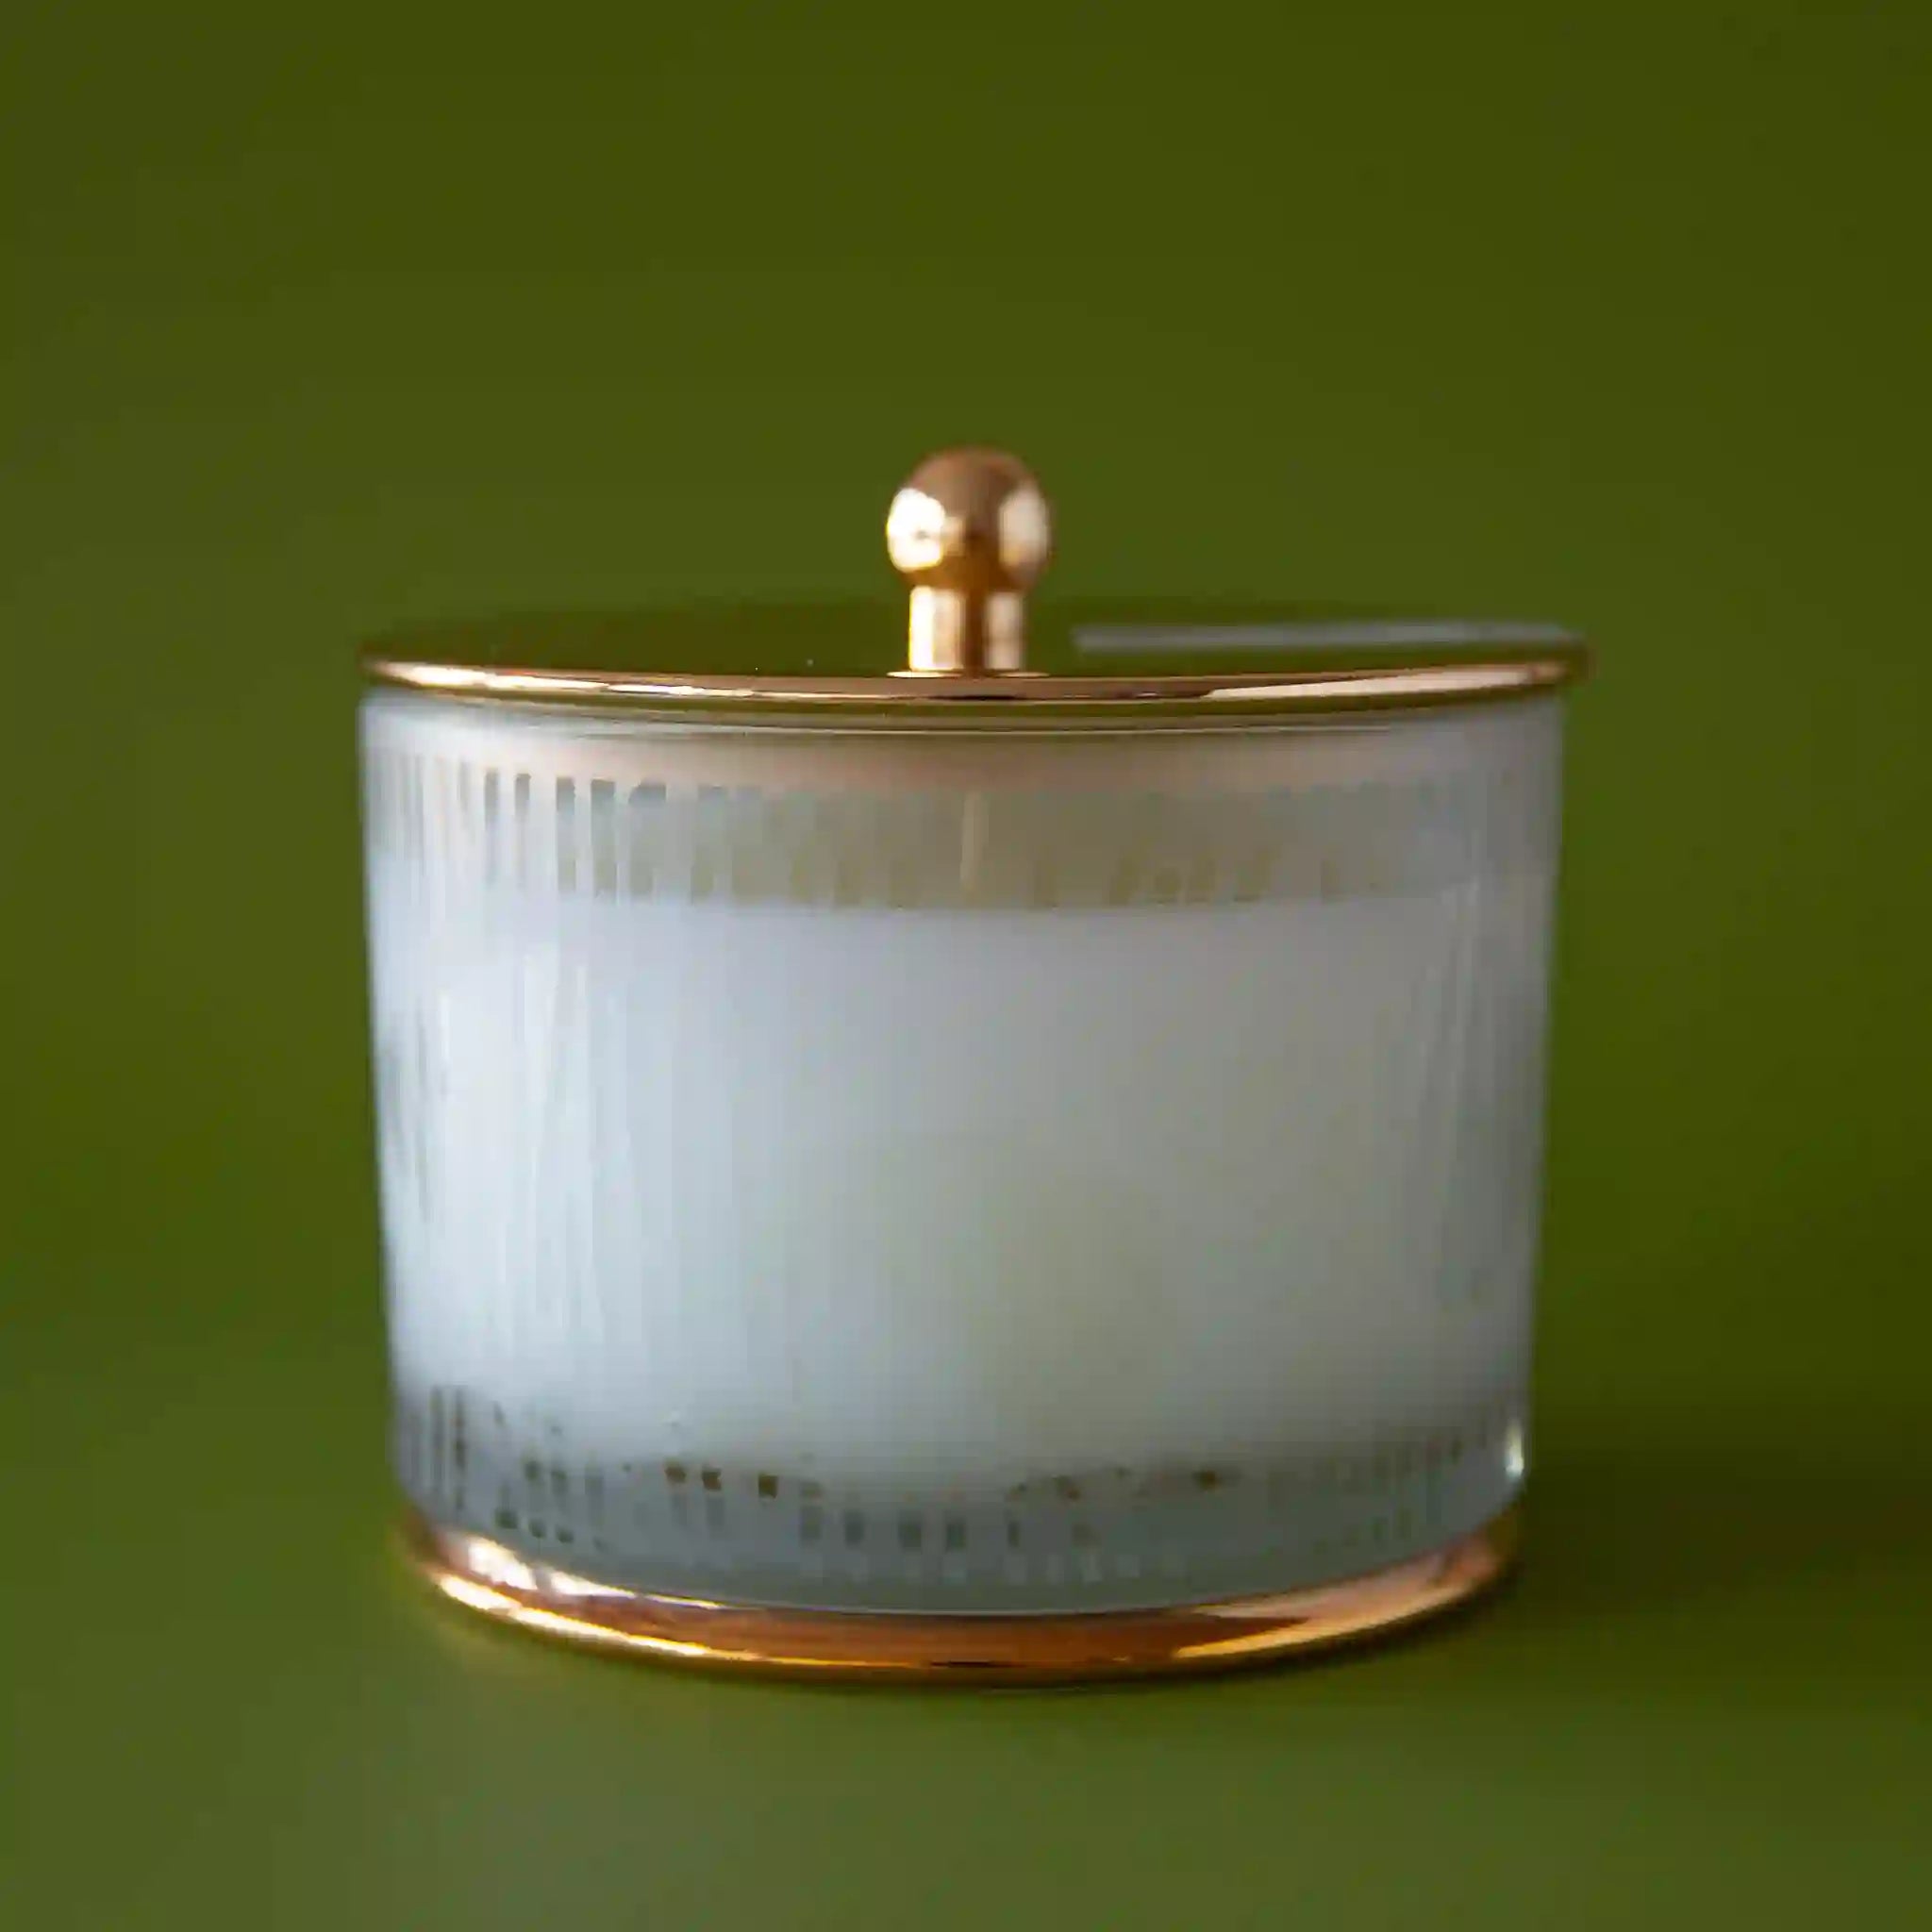 On a dark green background is a frosted glass jar candle with a gold lid.